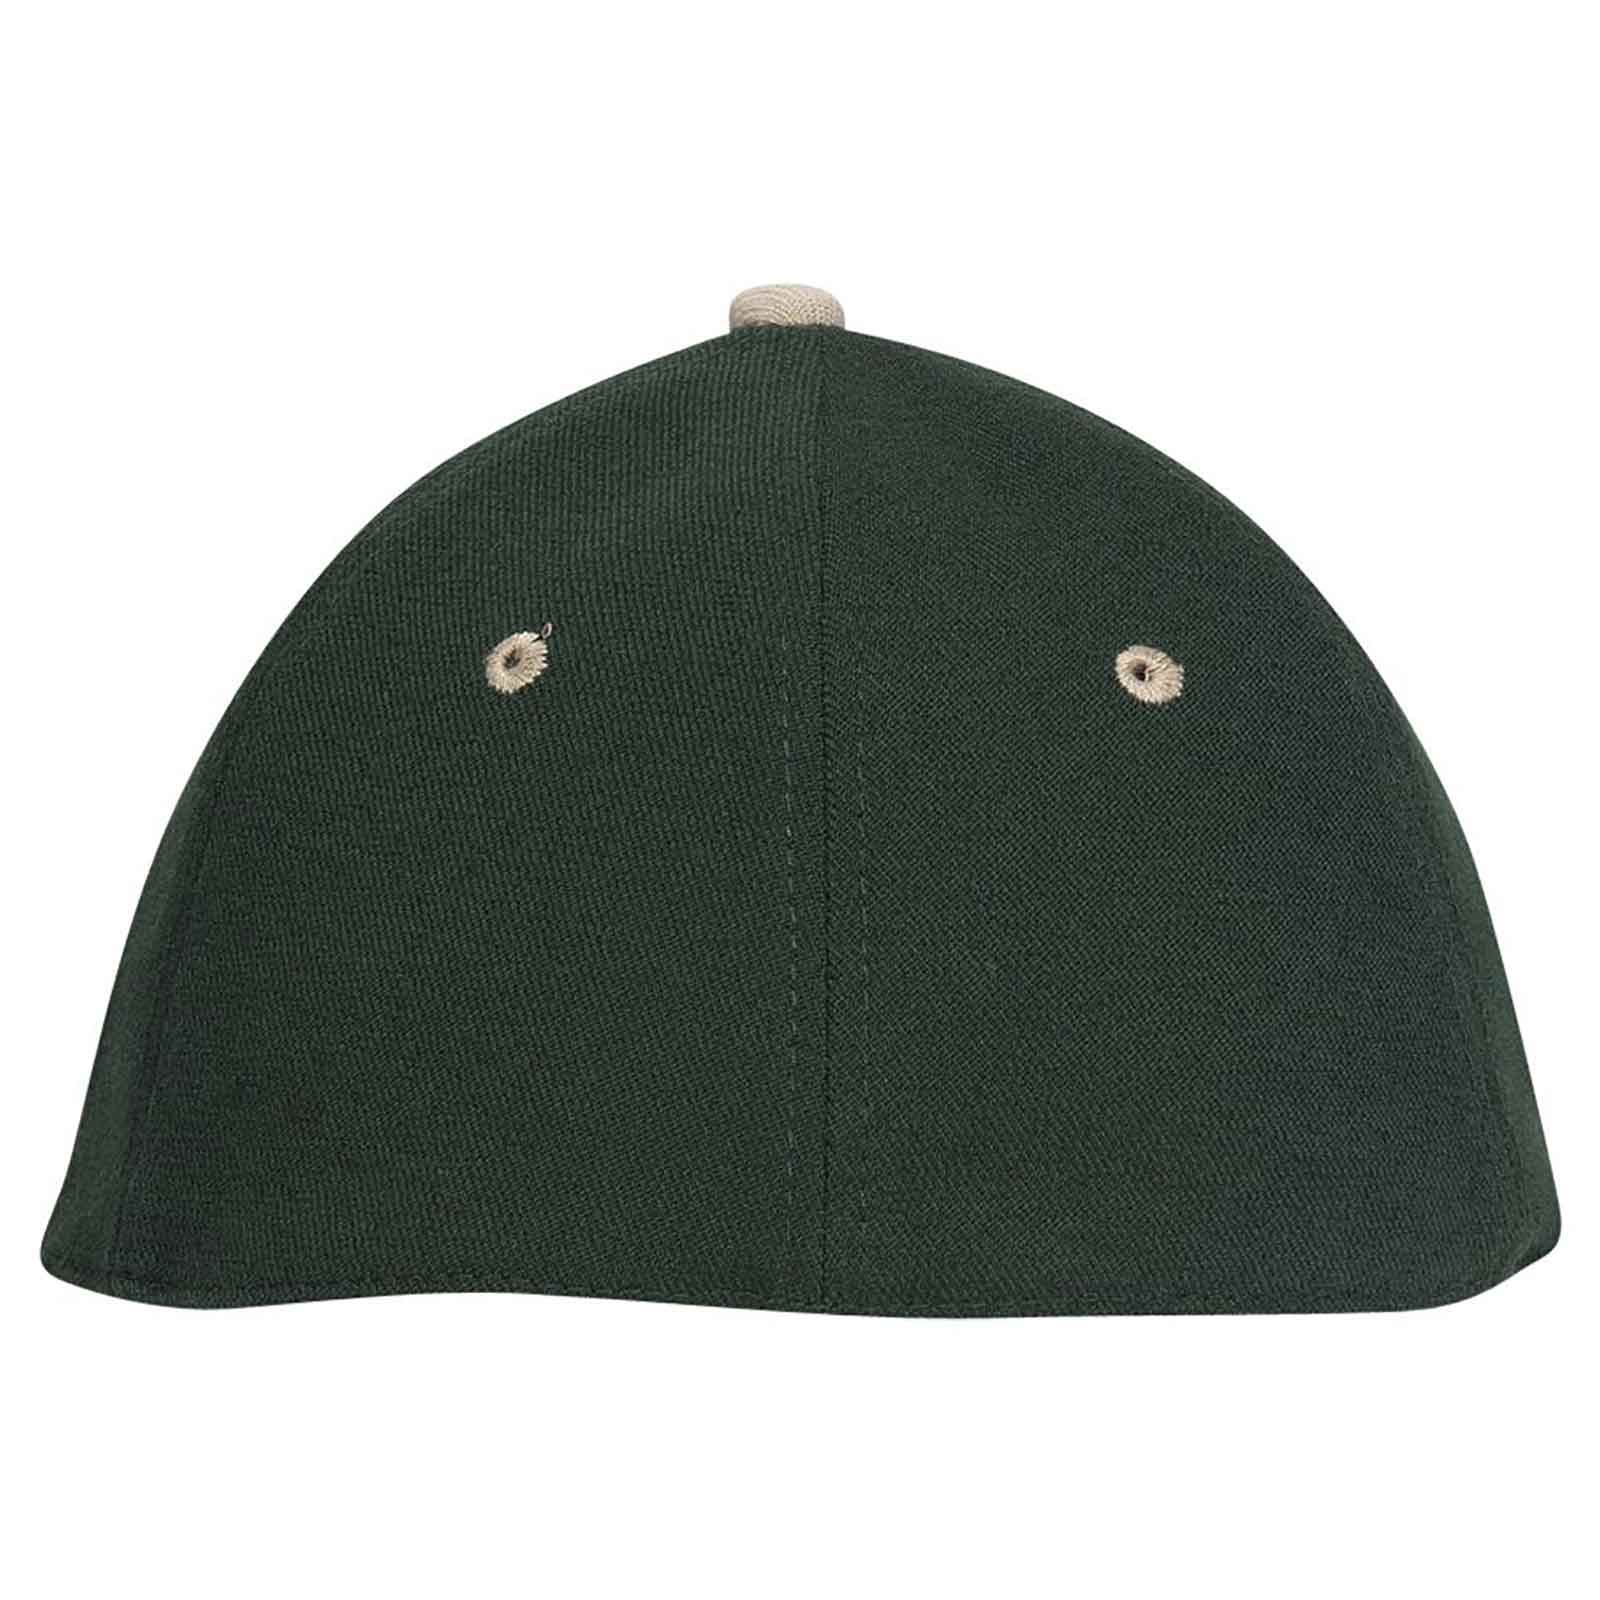 OTTO 11-194 Stretchable Wool Blend Low Profile Pro Style Cap - Khaki Dark Green - HIT a Double - 1